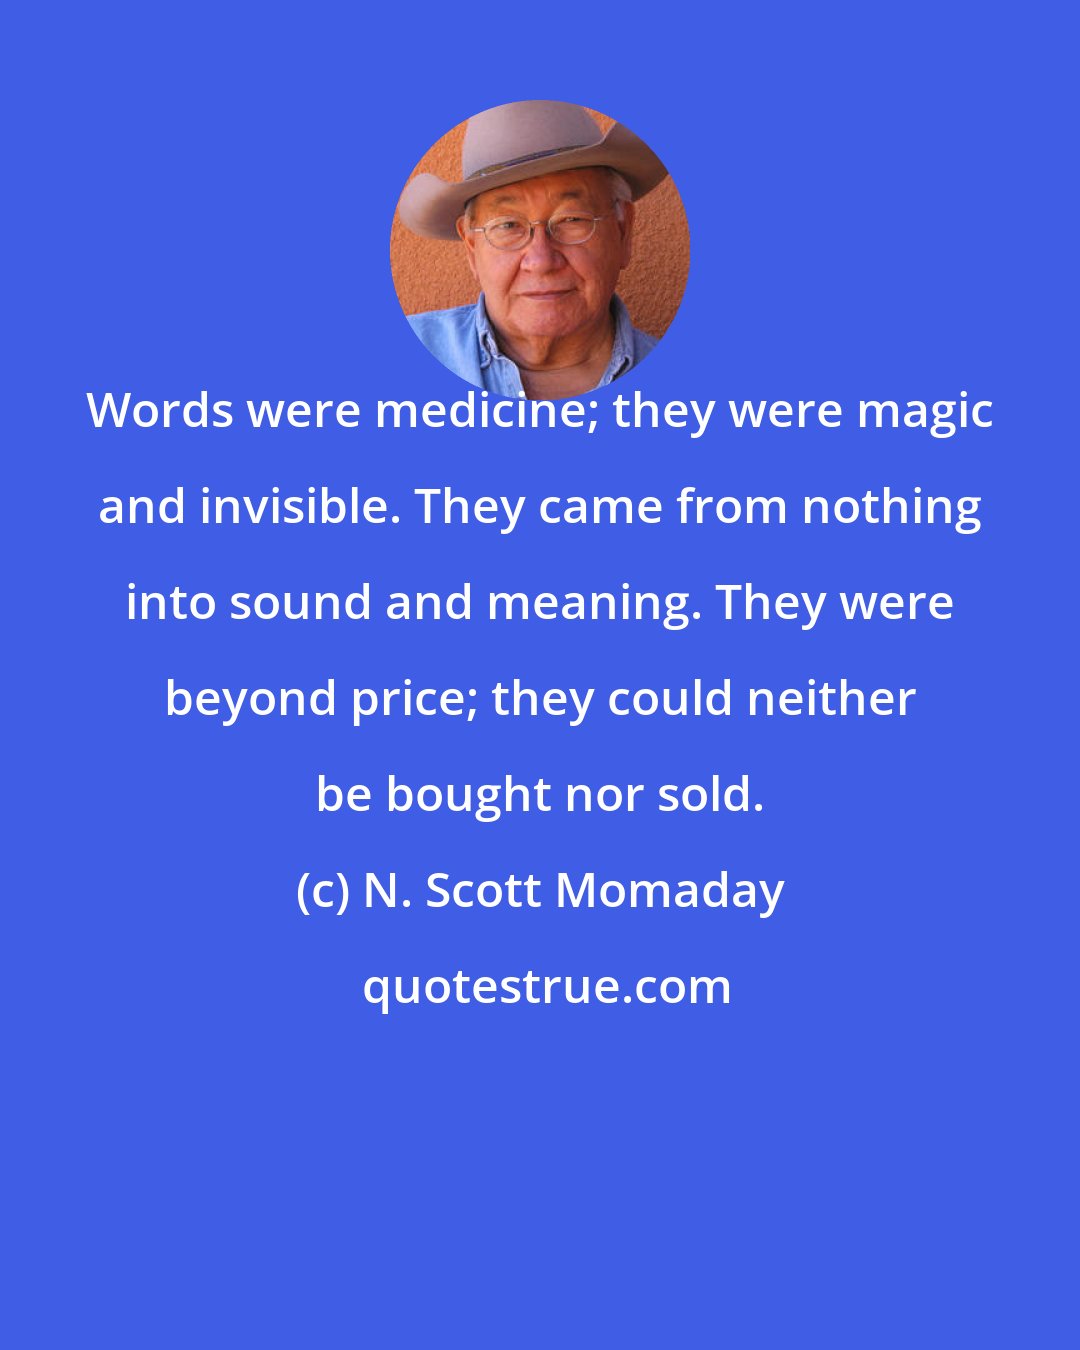 N. Scott Momaday: Words were medicine; they were magic and invisible. They came from nothing into sound and meaning. They were beyond price; they could neither be bought nor sold.